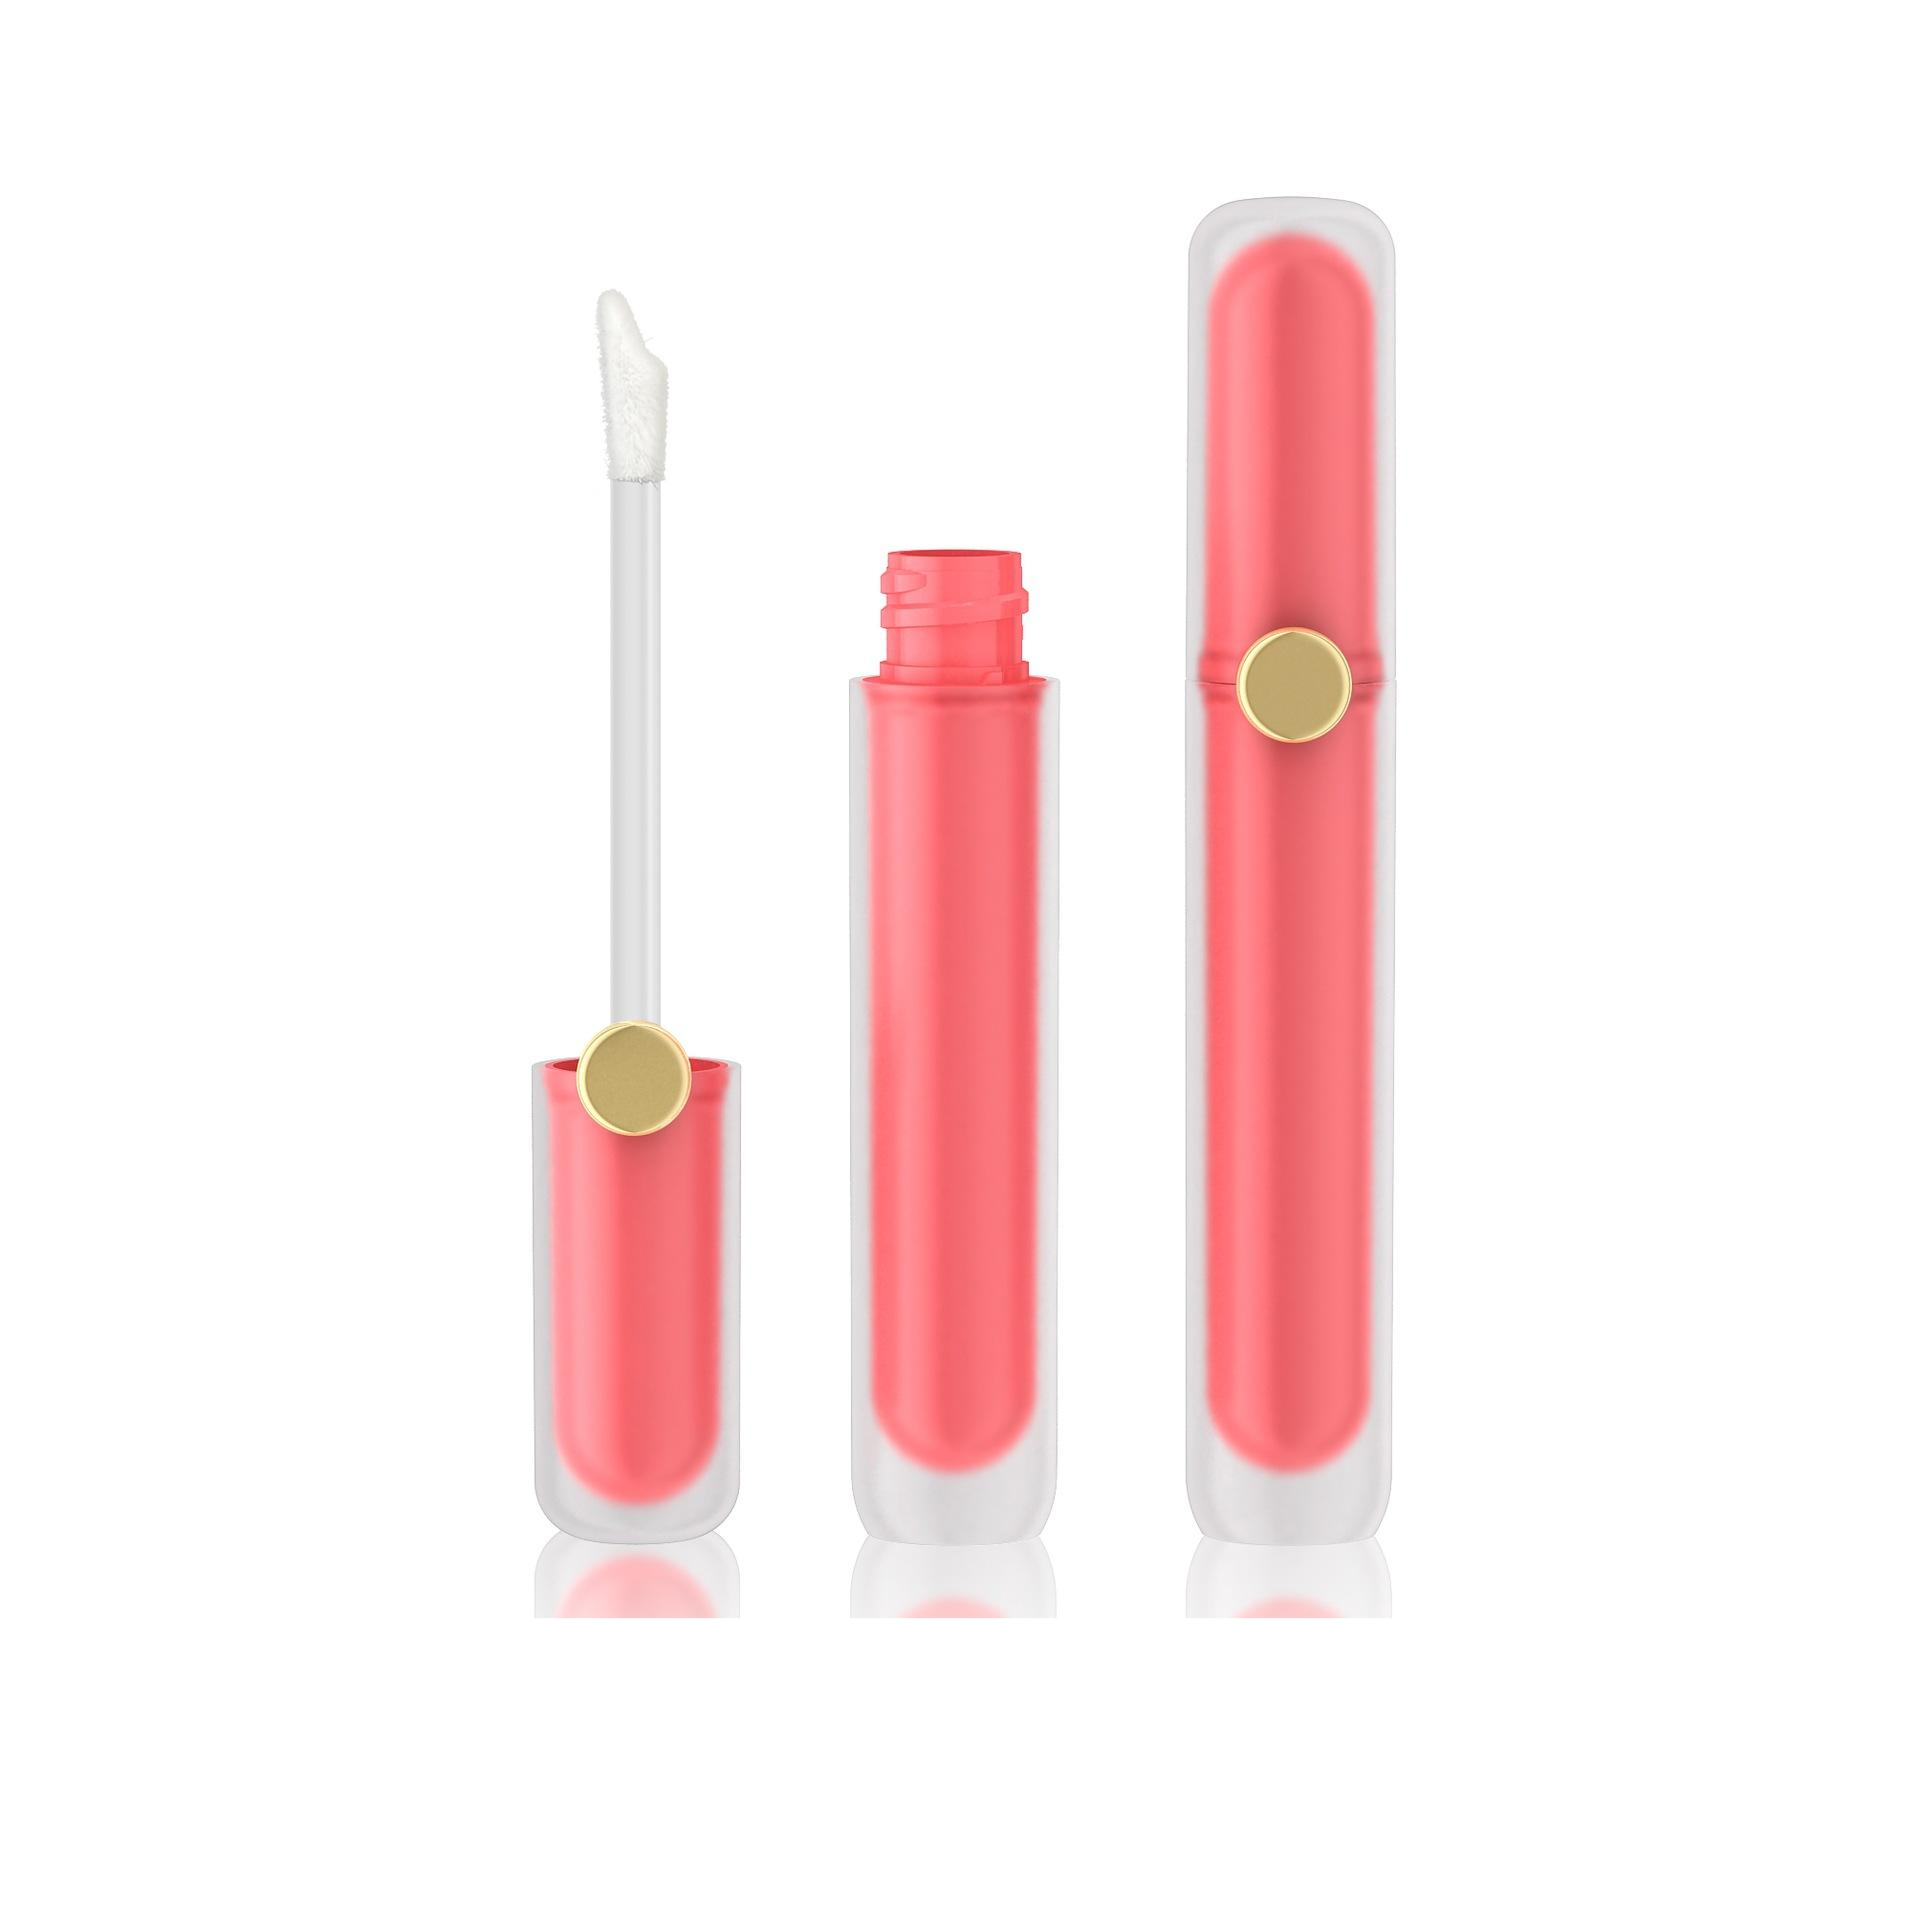 Best Price on Silver Lip Gloss Tubes - 6ml unique cute  Lipgloss Tube empty Lip Gloss Containers transparent liquid lipstick oval bottle  with brush tip applicator – EUGENG